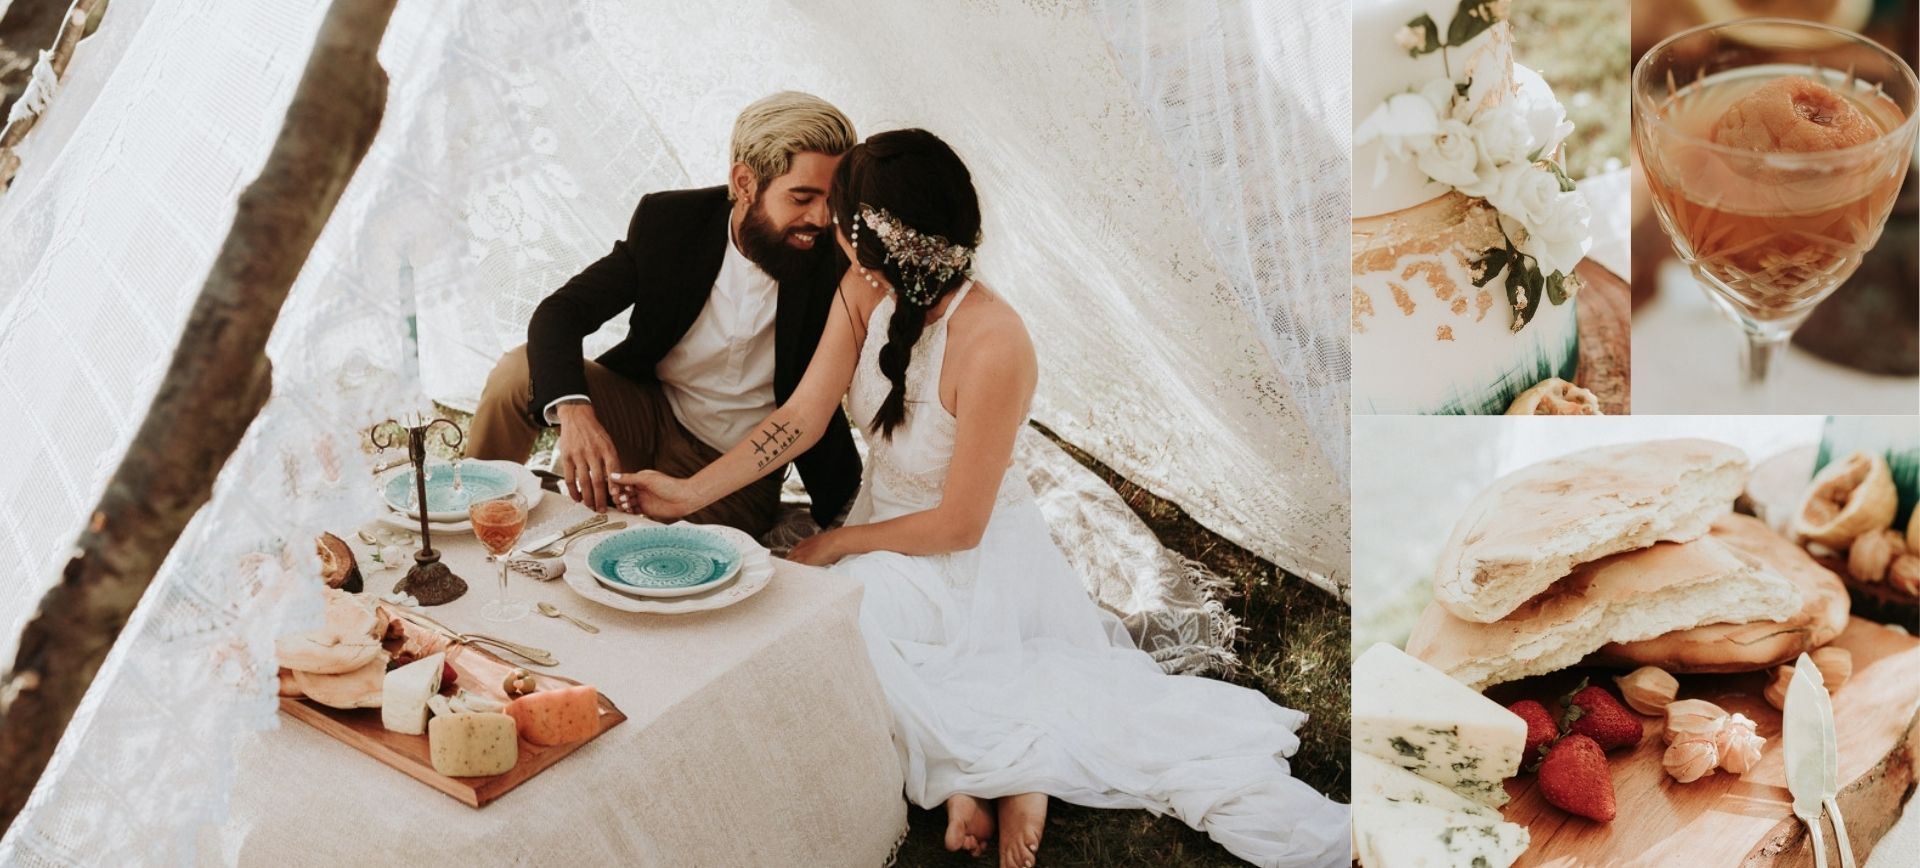 chile glamping elopement - bride and groom at their wedding picnic